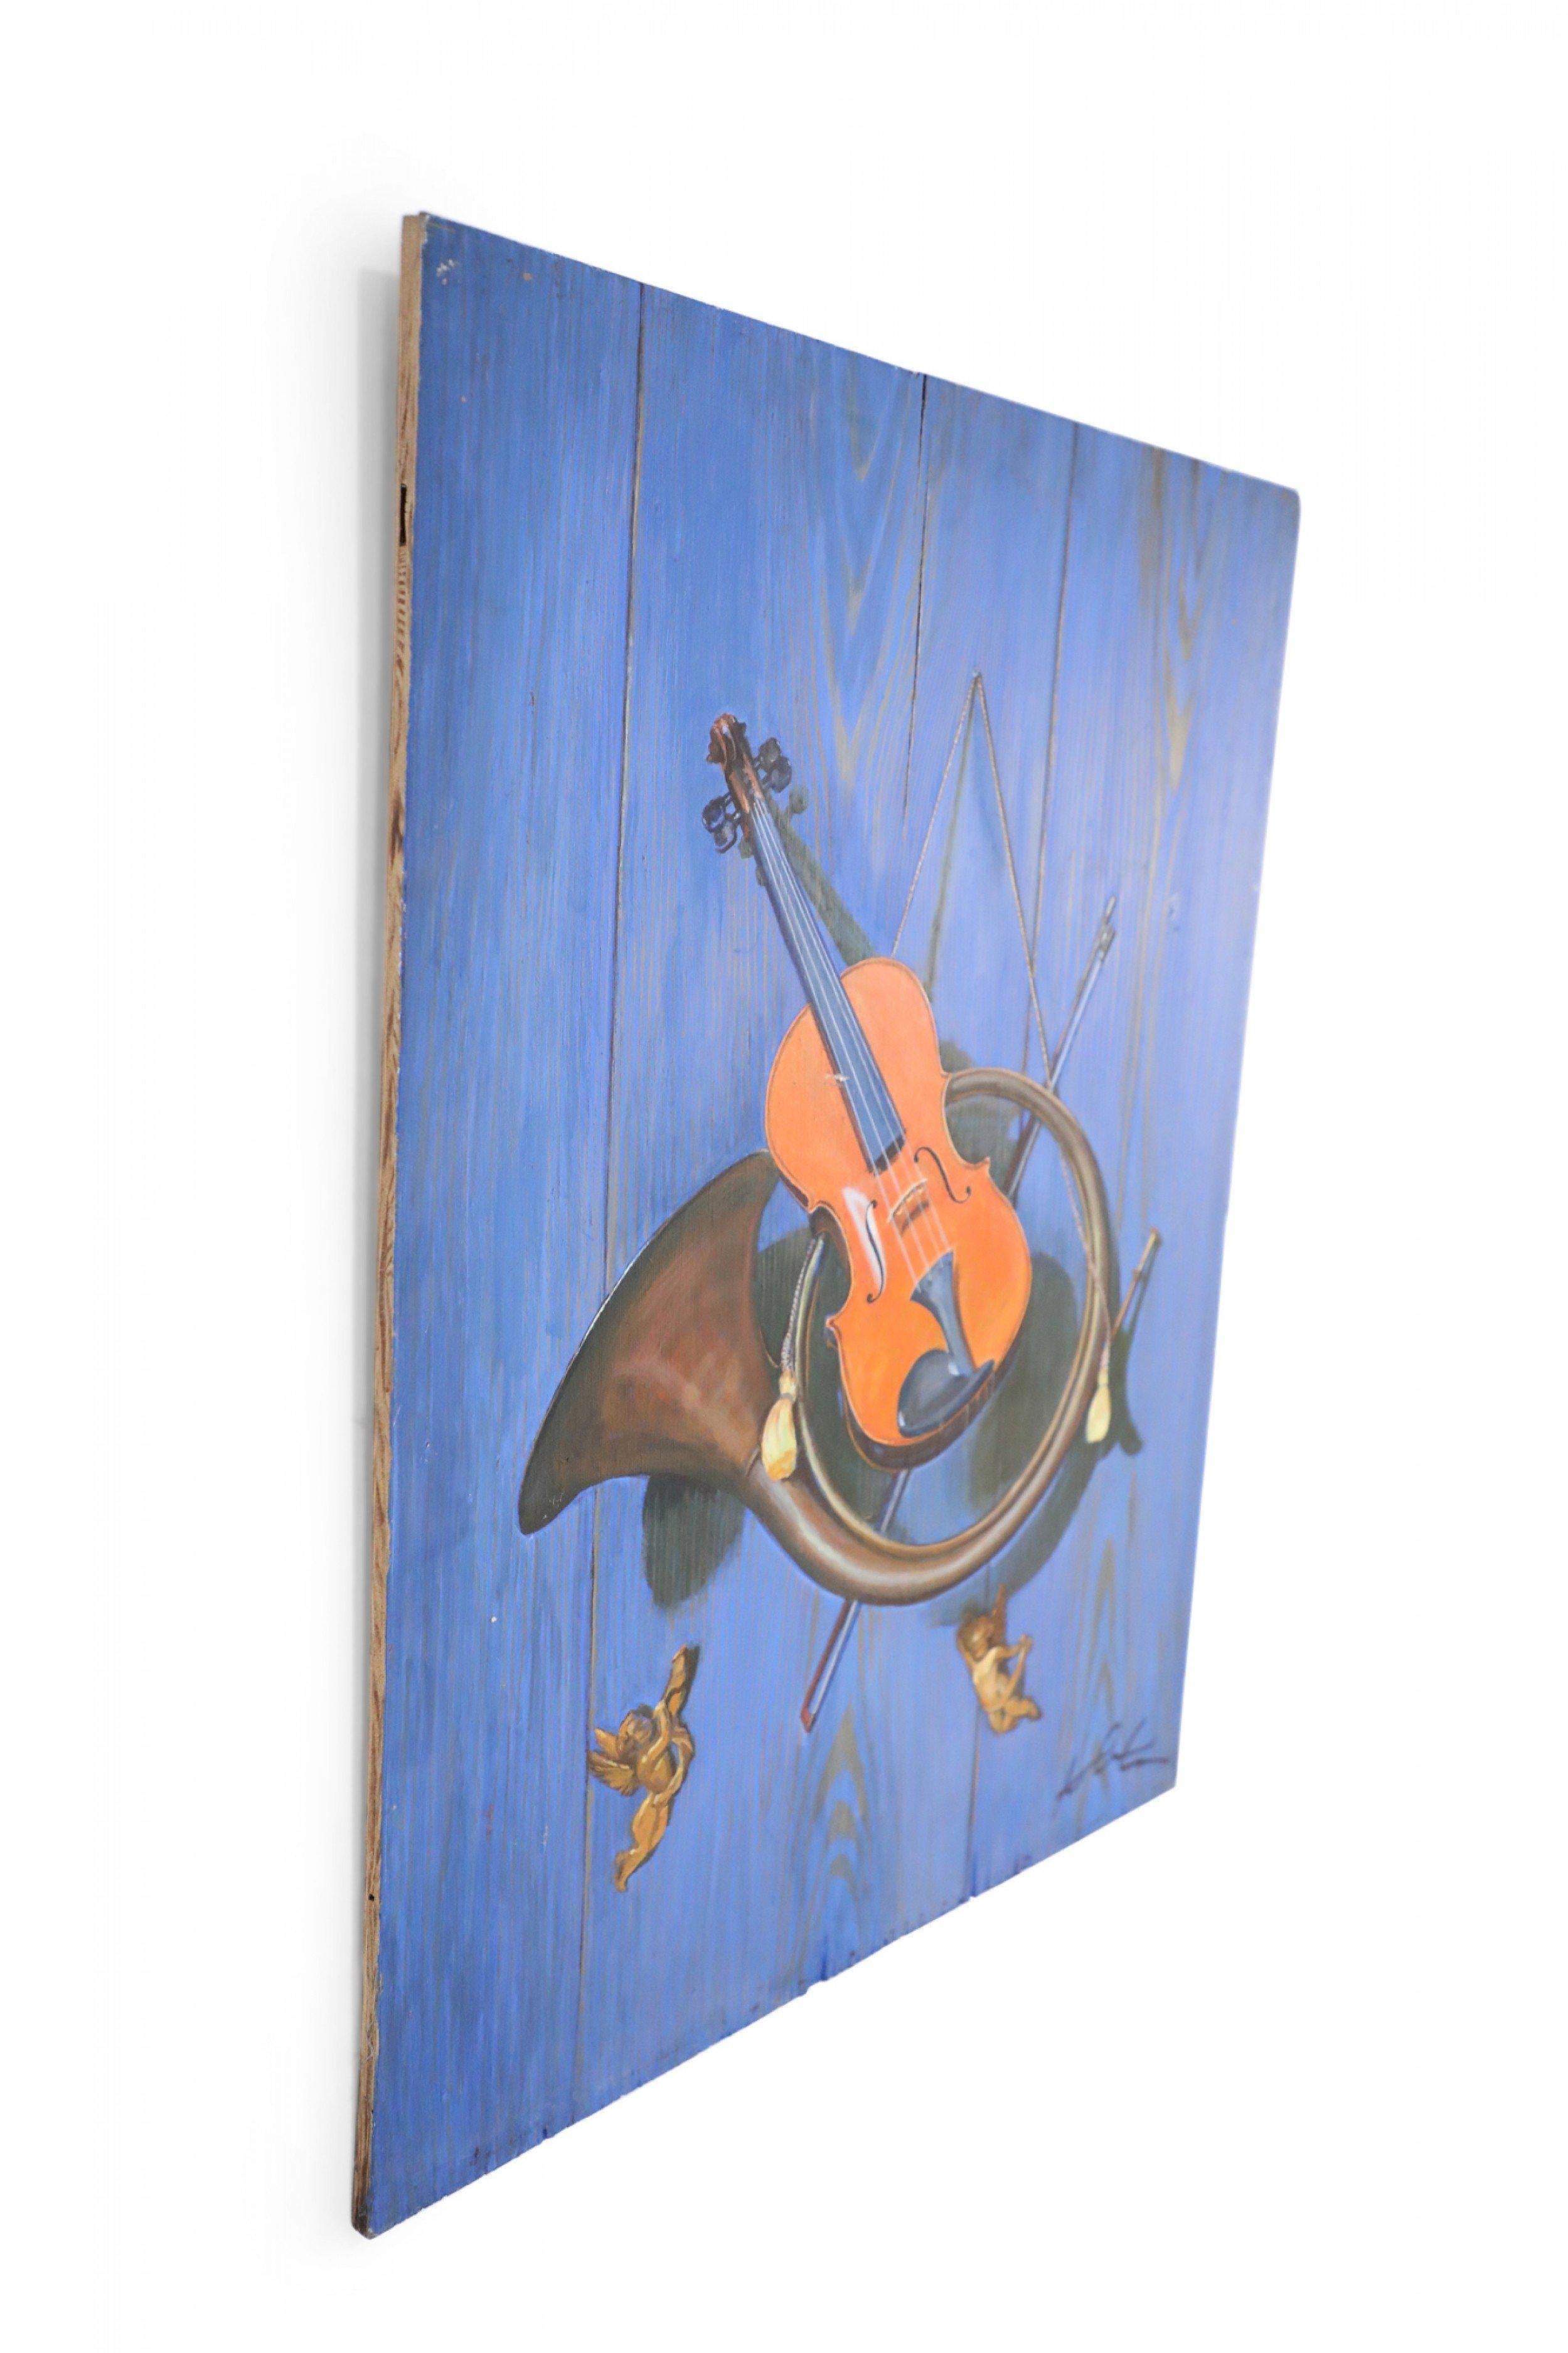 Vintage Brass Horn and Violin Still Life Painting on Wood For Sale 2